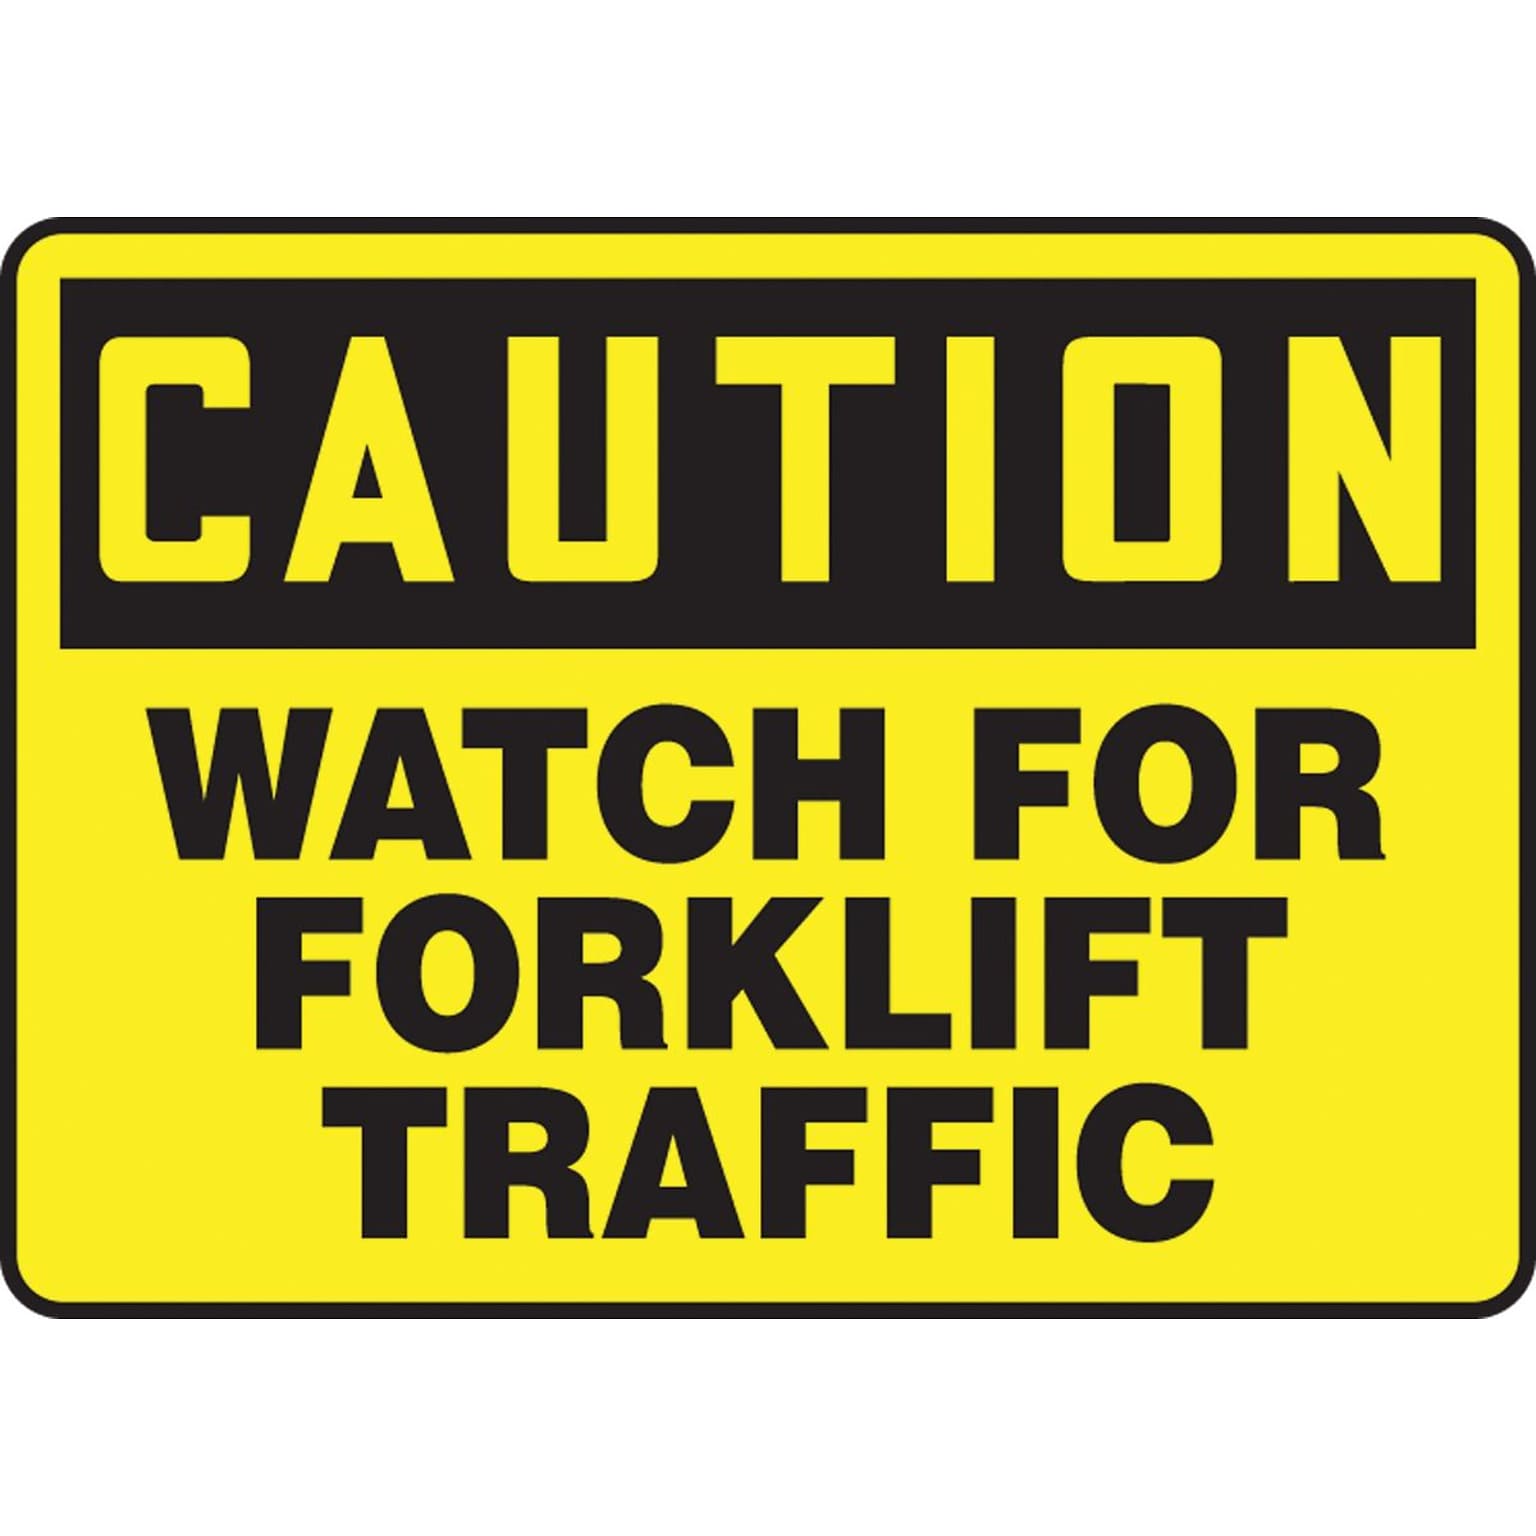 Accuform 7 x 10 Vinyl Safety Sign CAUTION WATCH FOR FORKLIFT TRAFFIC, Black On Yellow (MVHR631VS)